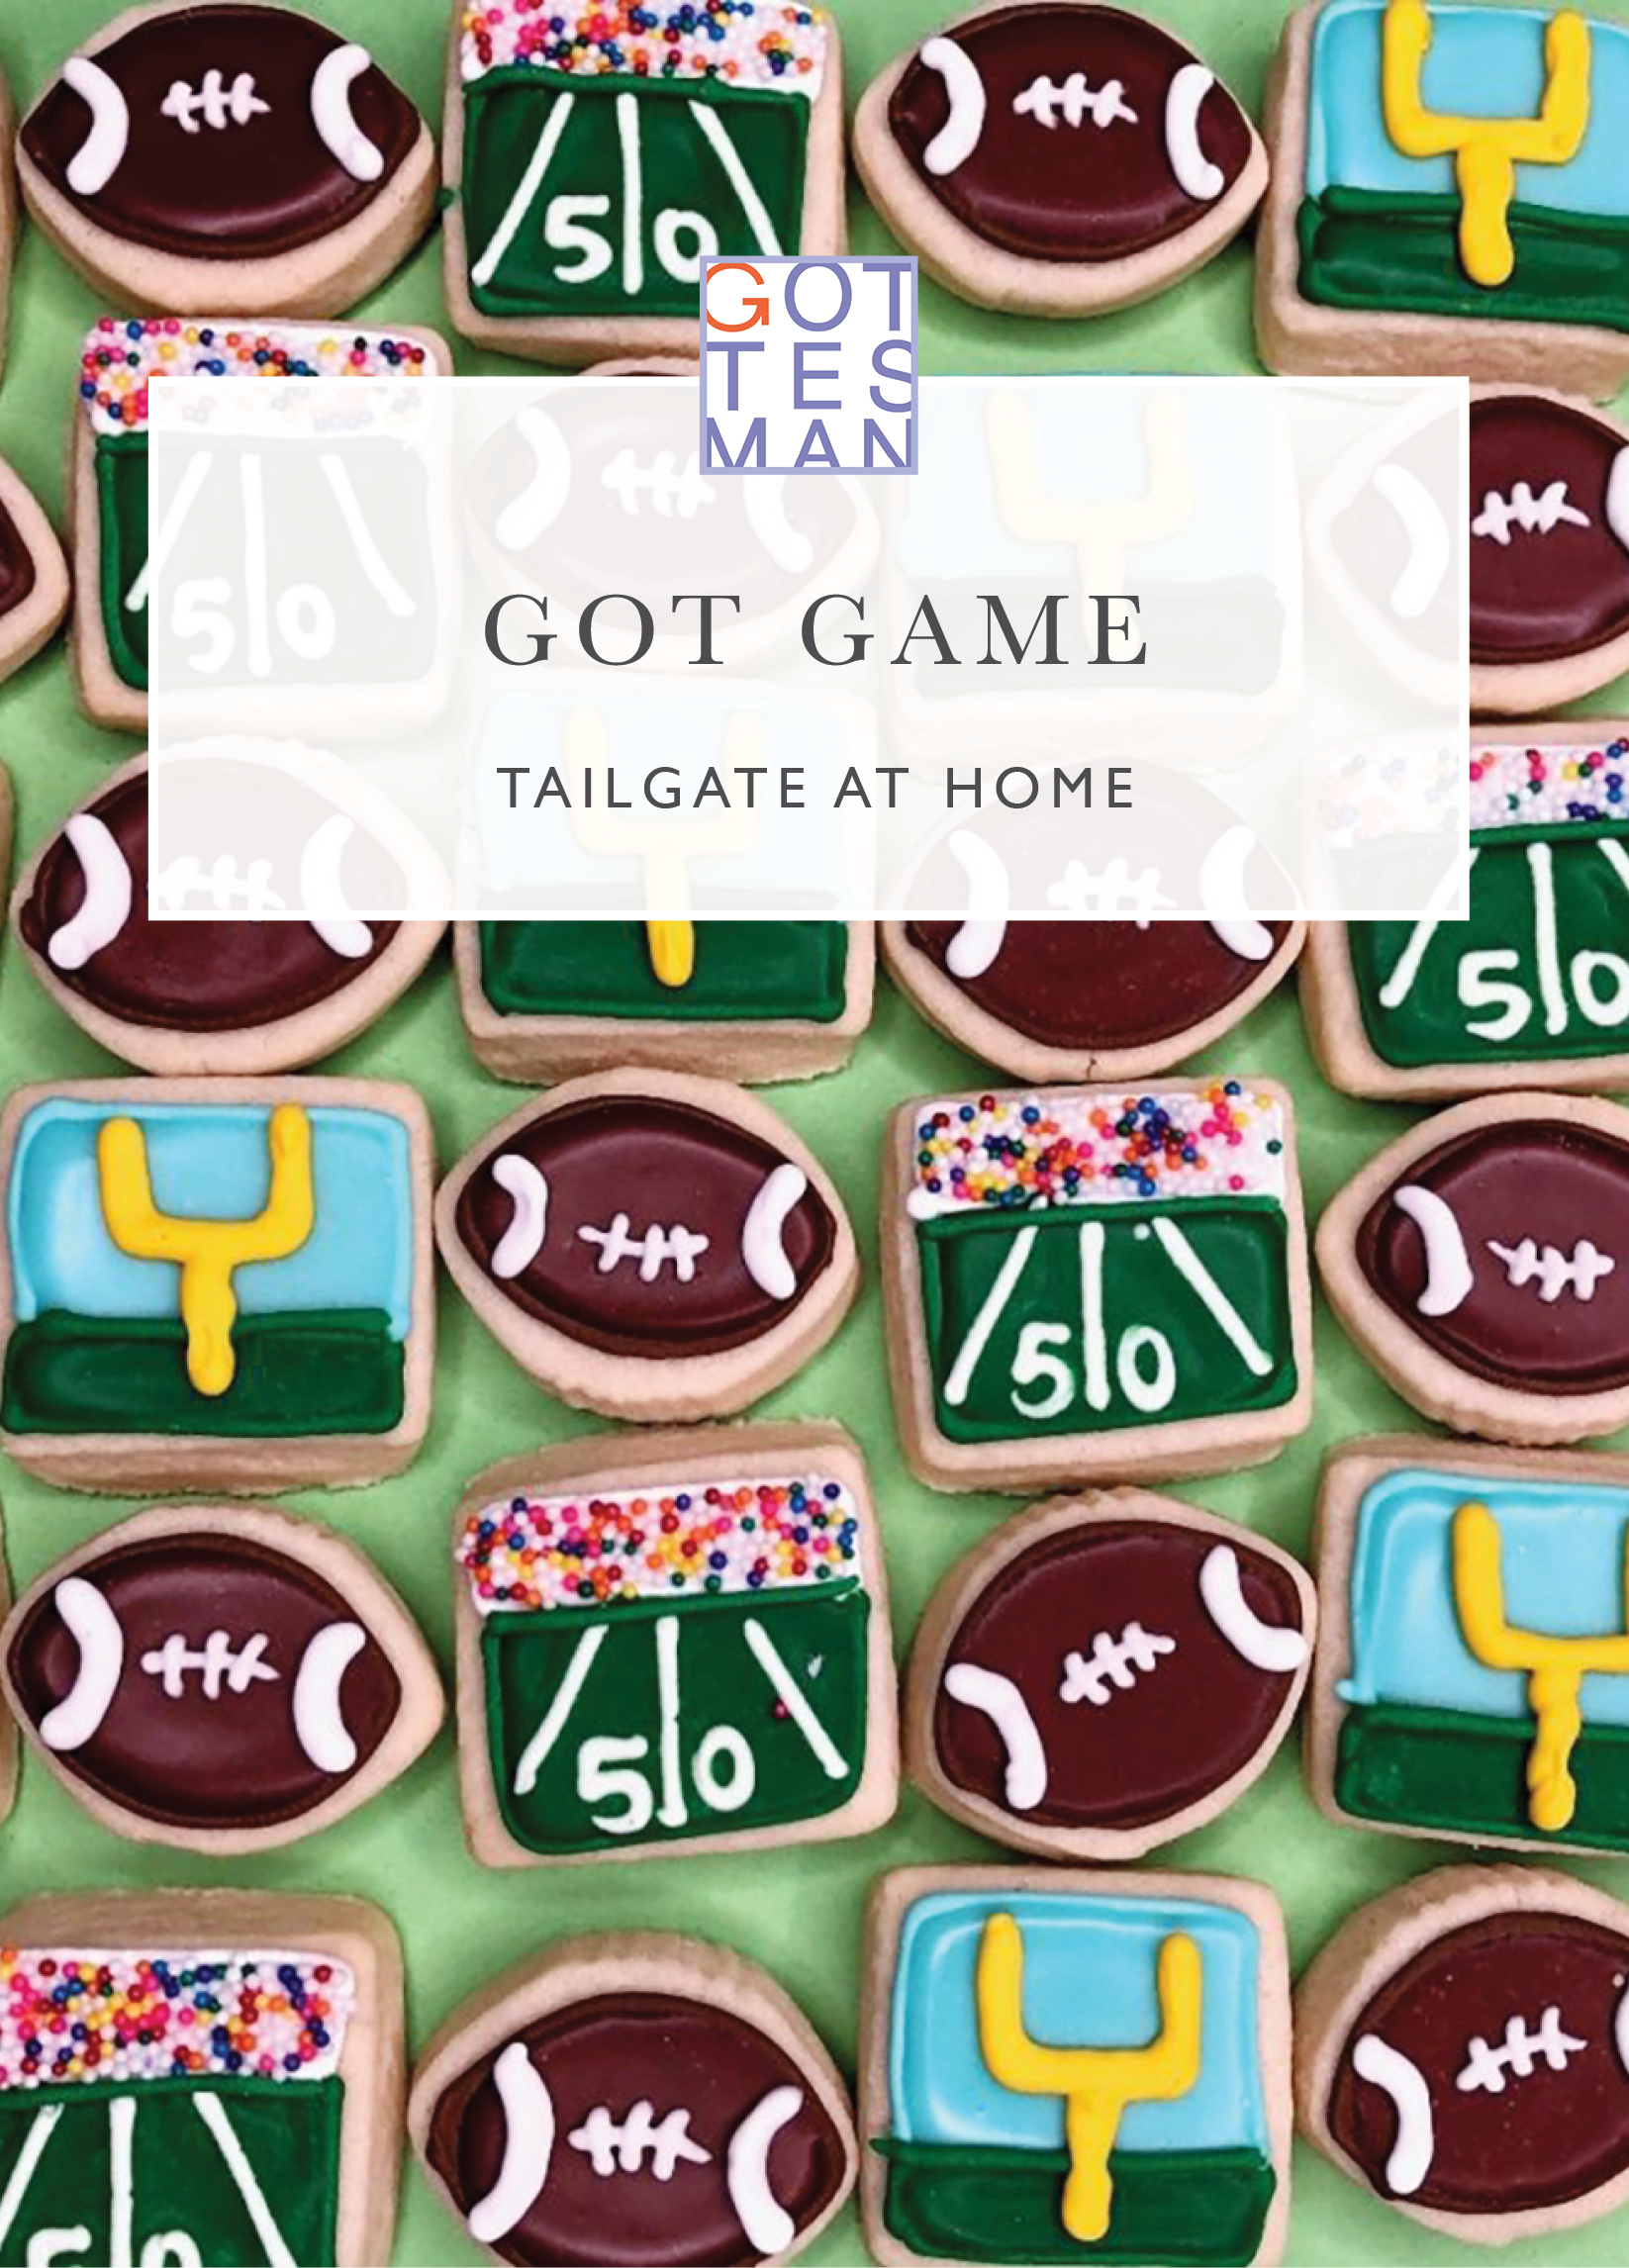 Football decorated cookies with text overlay, "Got Game: Tailgate at Home"